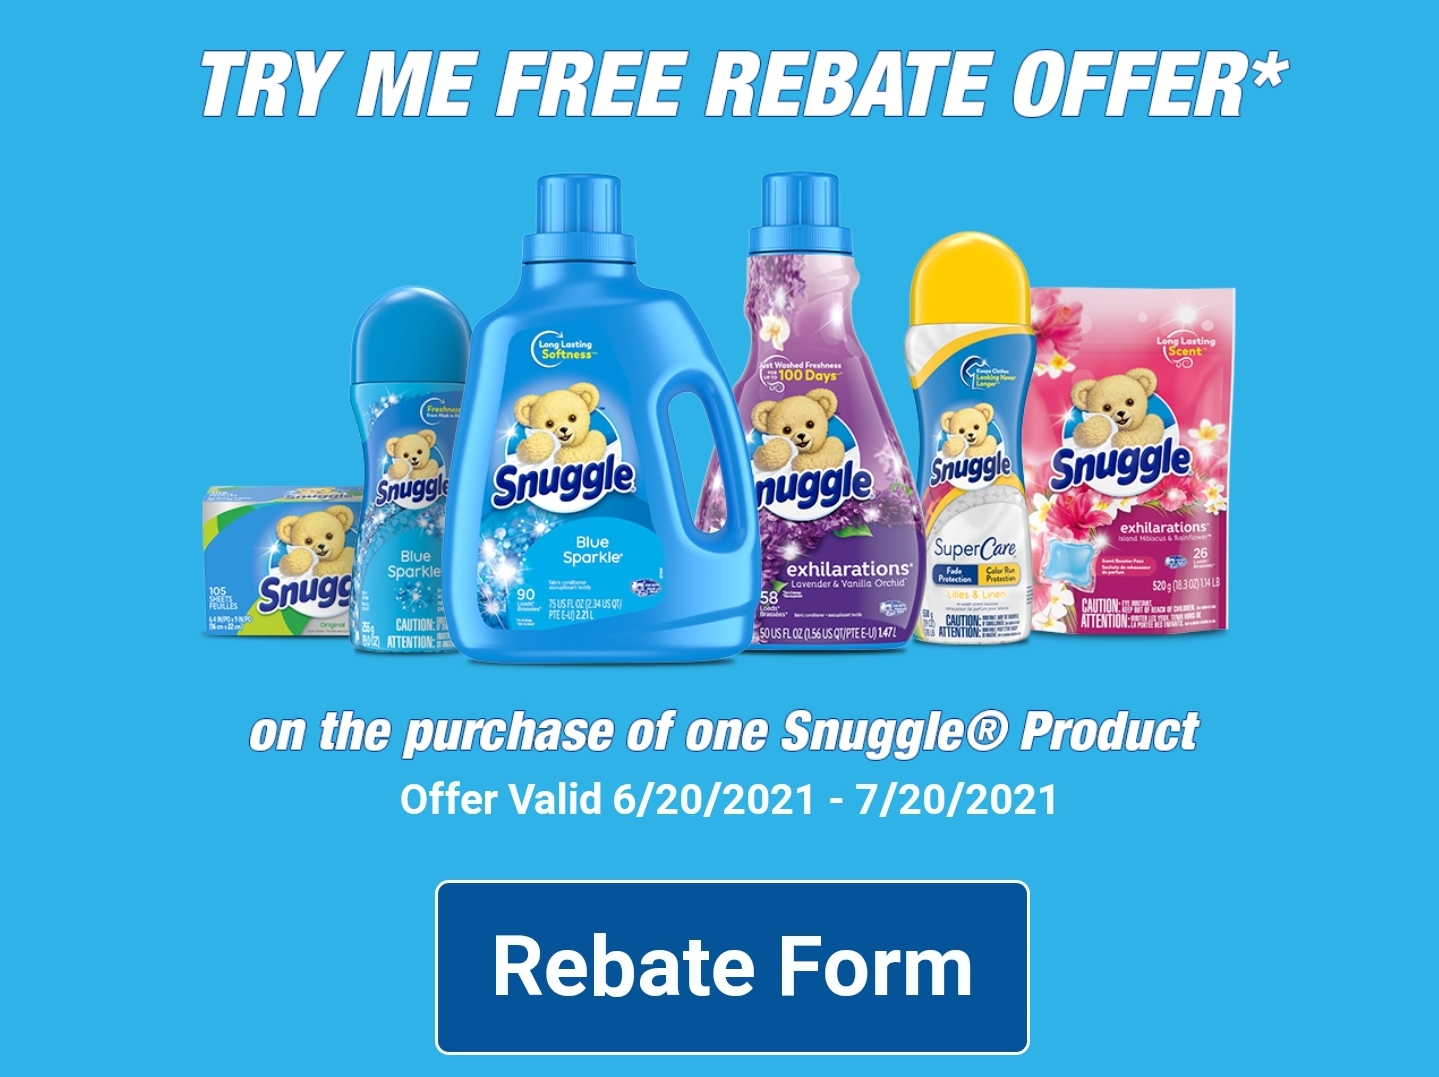 Free Snuggle product up to $10.99